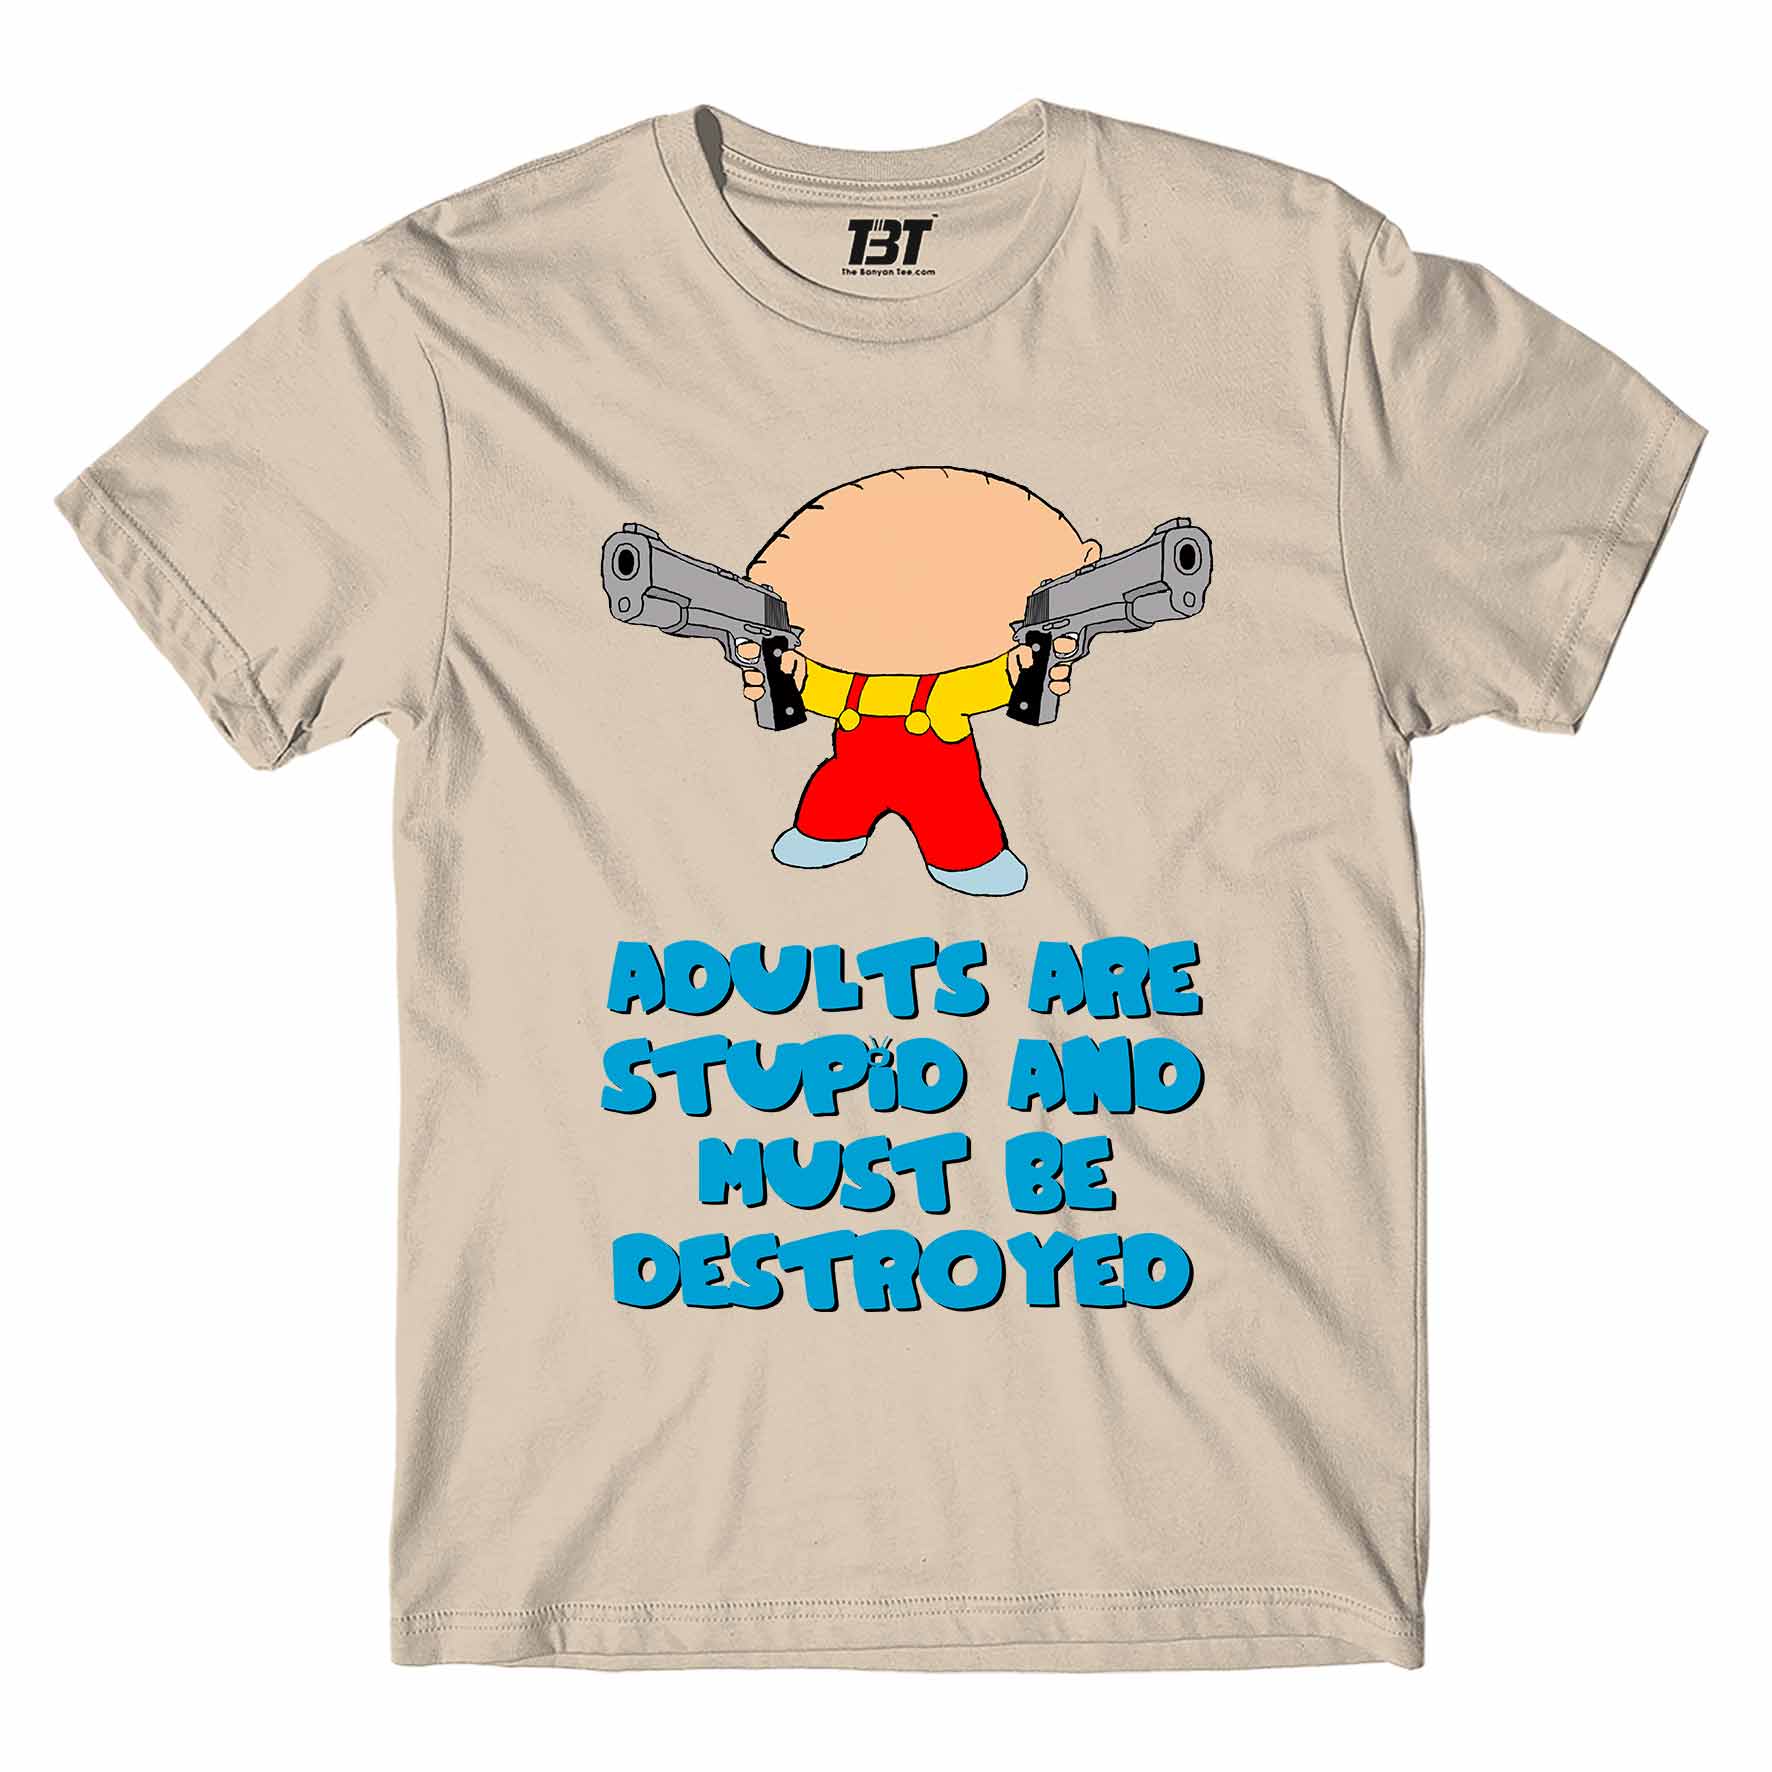 Family Guy T shirts by The Banyan Tee